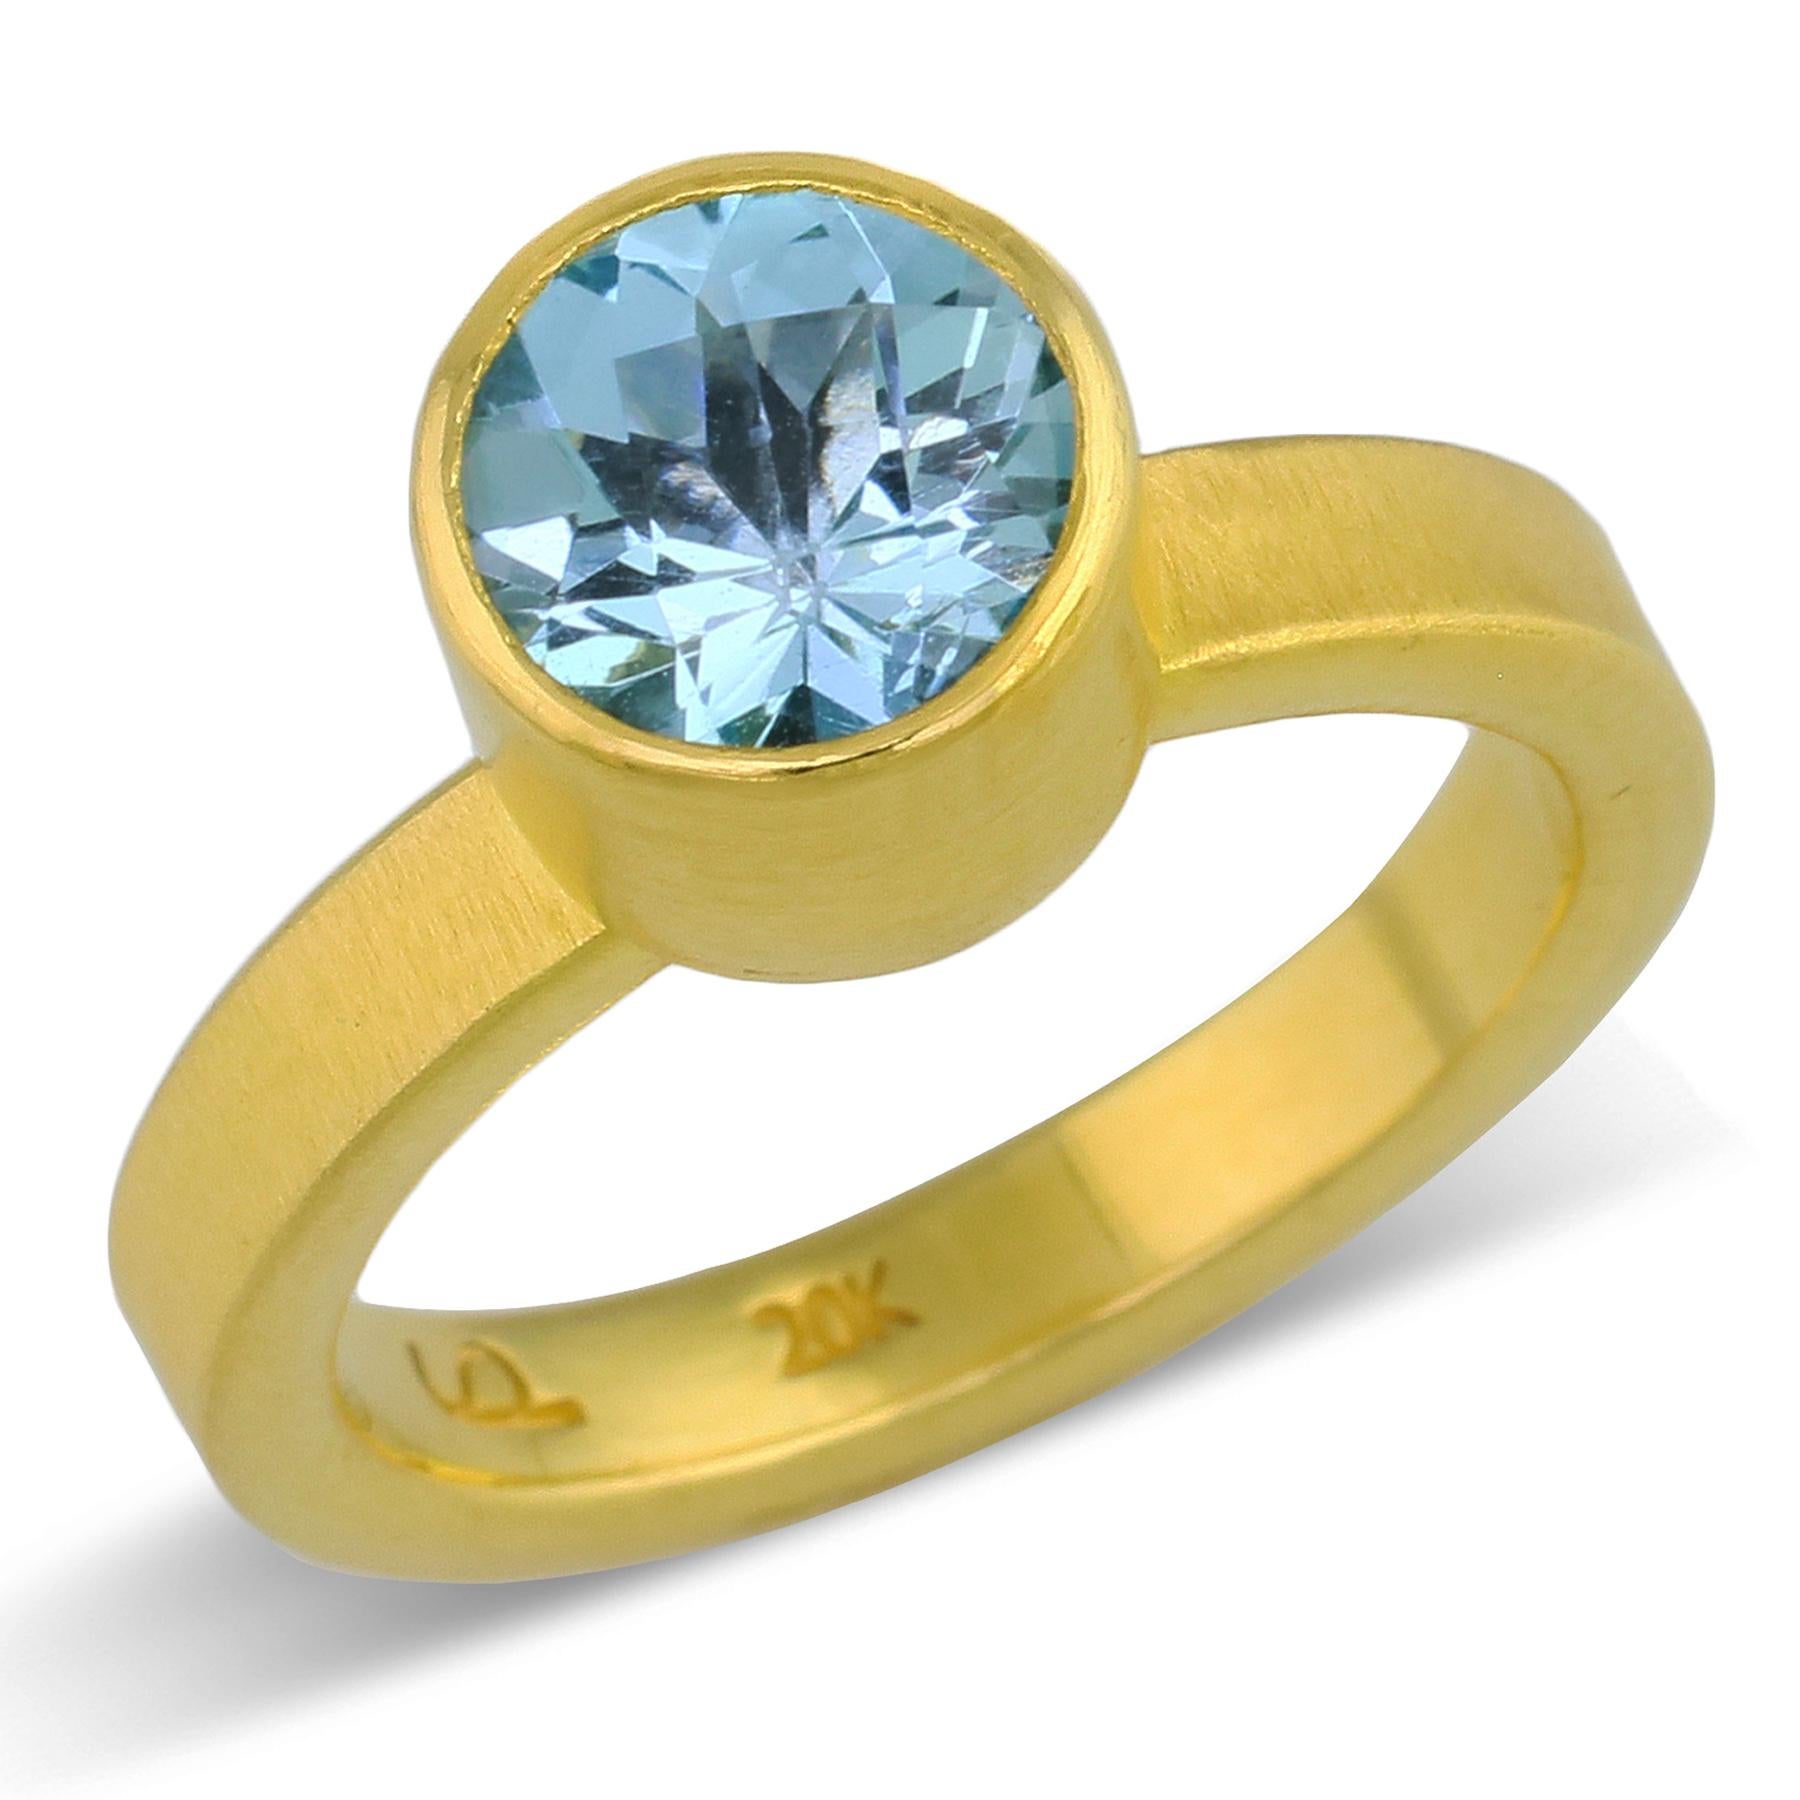 Artisan PHILIPPE SPENCER 2.5 Ct. Blue Topaz in 22K and 20K Gold Statement Ring For Sale